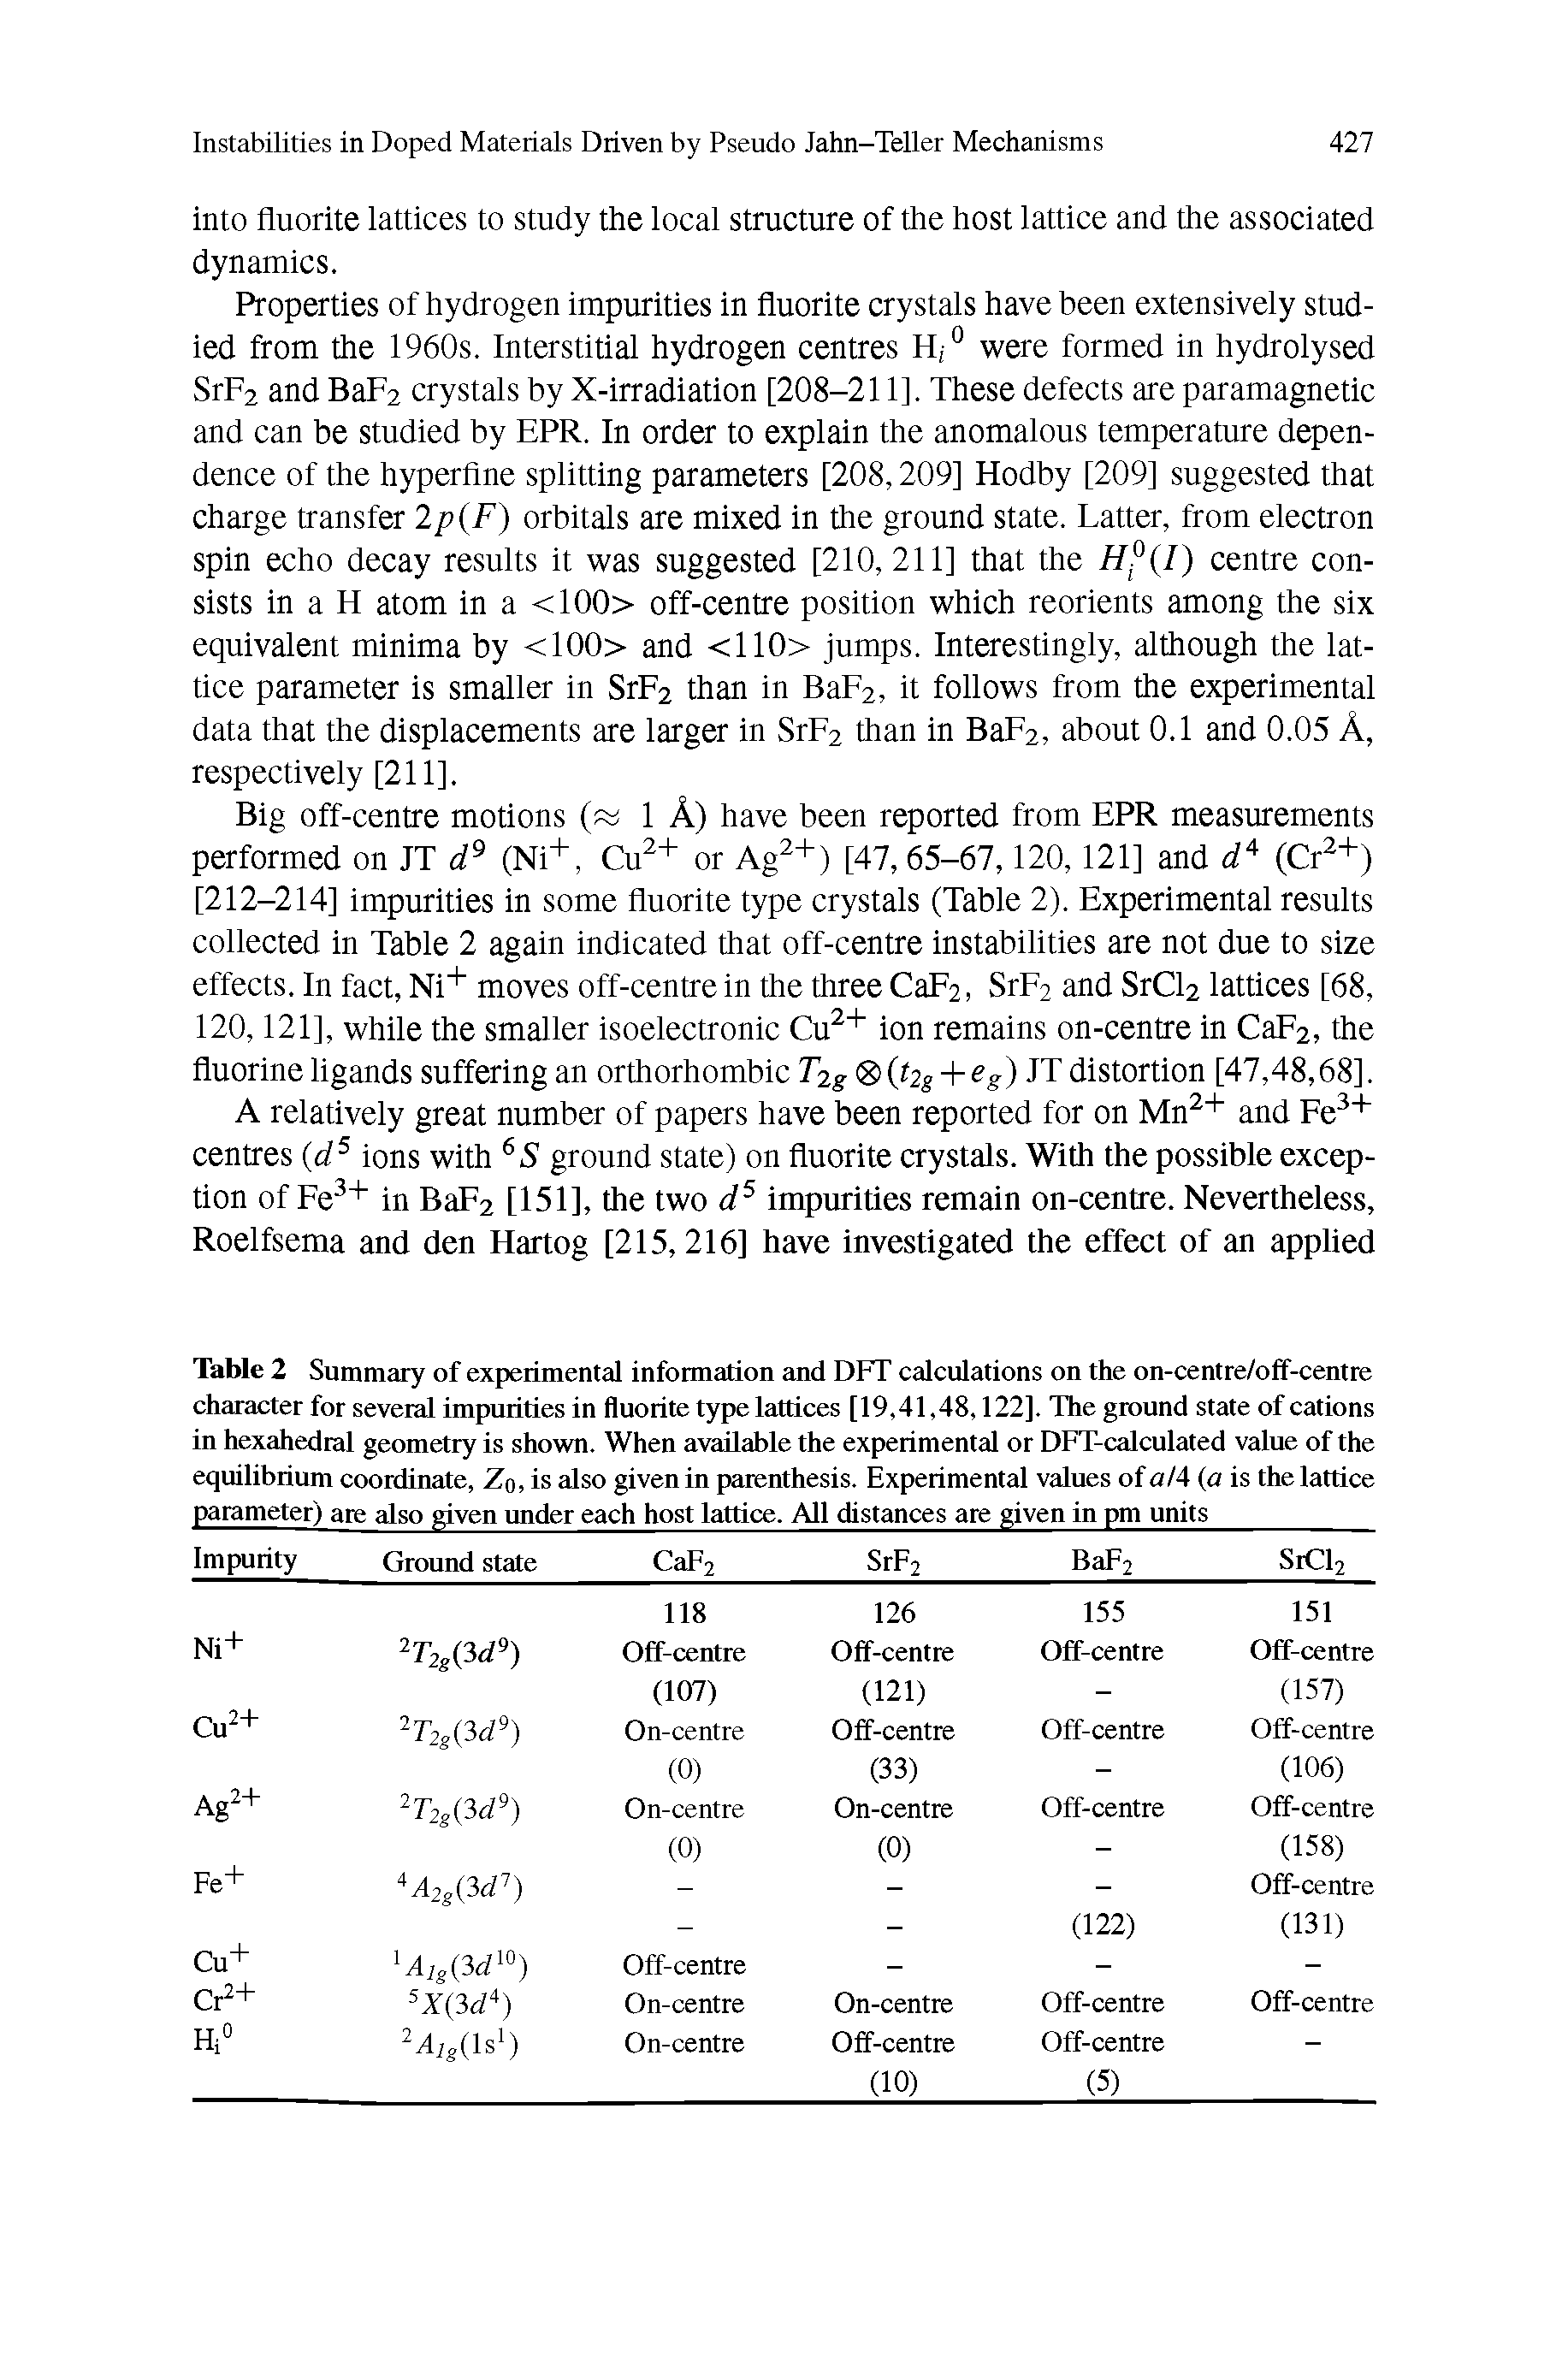 Table 2 Summary of experimental information and DFT calculations on the on-centre/off-centre character for several impurities in fluorite type lattices [19,41,48,122]. The ground state of cations in hexahedral geometry is shown. When available the experimental or DFT-calculated value of the equilibrium coordinate, Zq, is also given in parenthesis. Experimental values ofa/4 (a is the lattice parameter) are also given under each host lattice. All distances are given in pm units ...